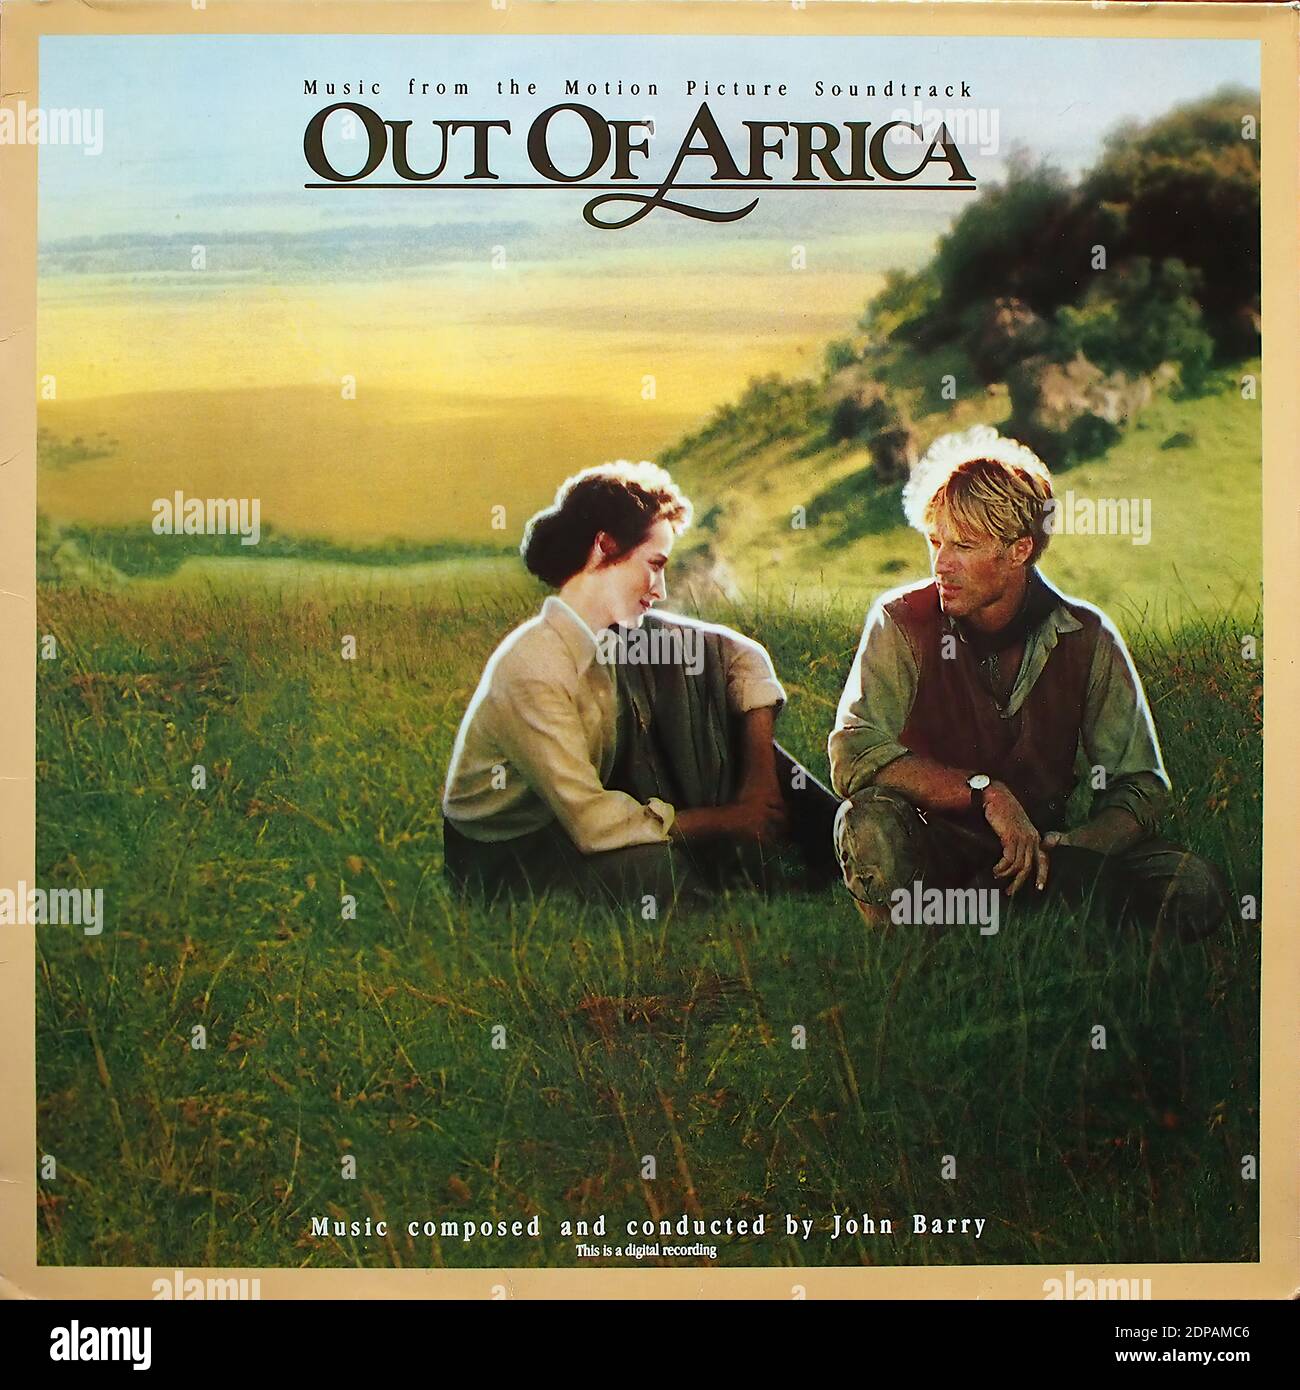 Out Of Africa - Music from the Motion Picture Soundtrack, John Barry, 1986 Digital  - Vintage vinyl album cover Stock Photo